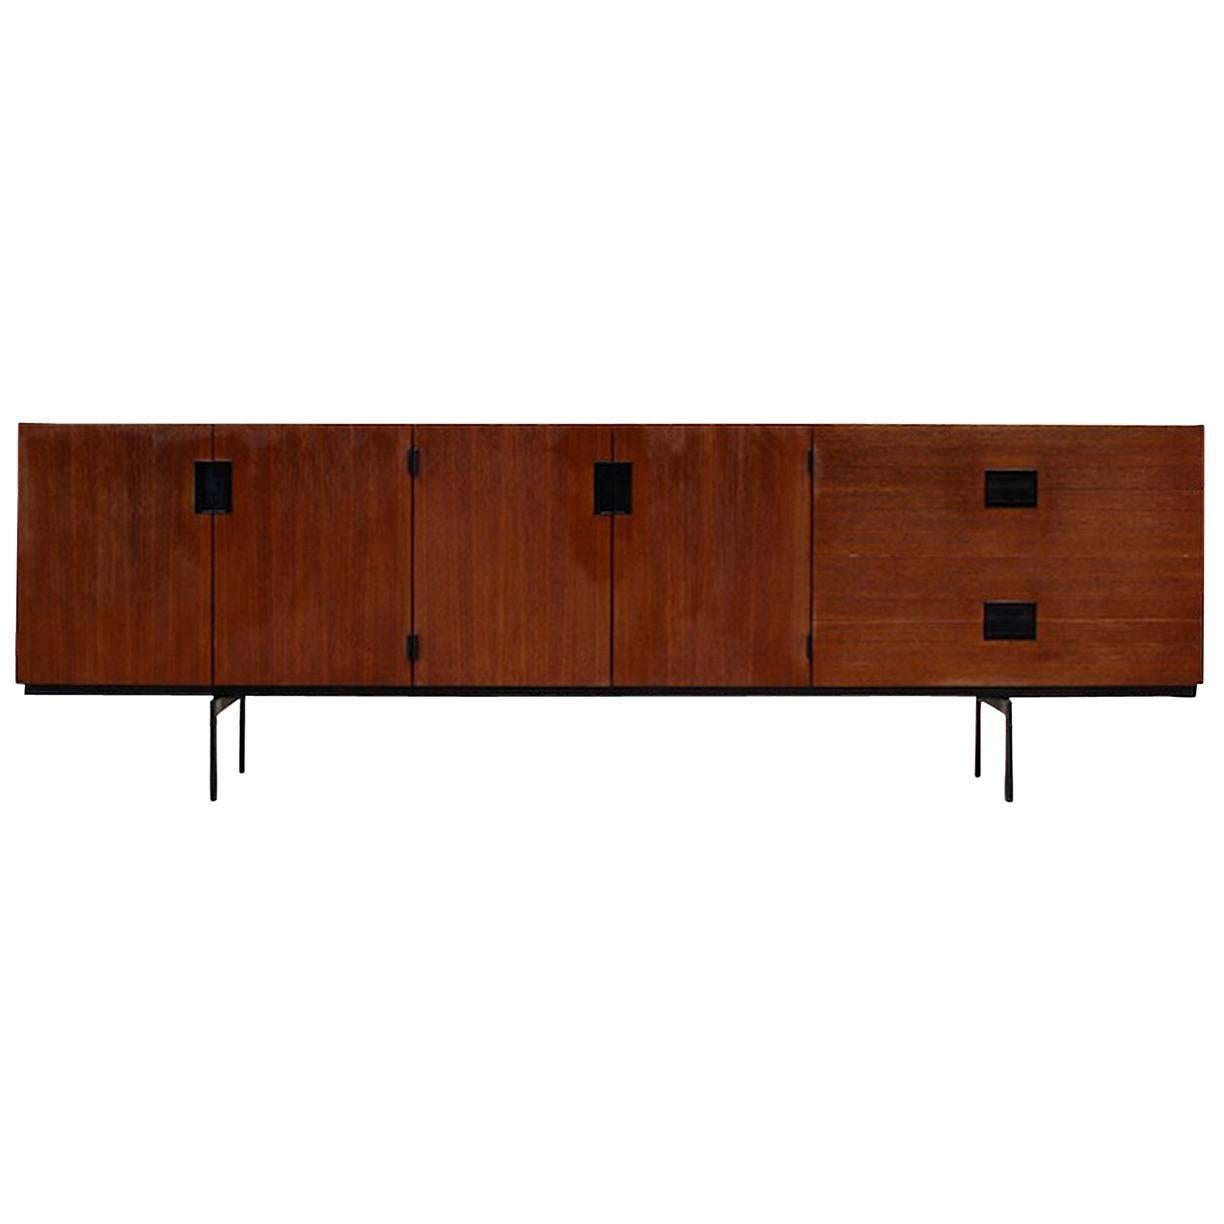 "Japanese Series" DU03 Sideboard by Cees Braakman for UMS Pastoe, Dutch, 1950s For Sale